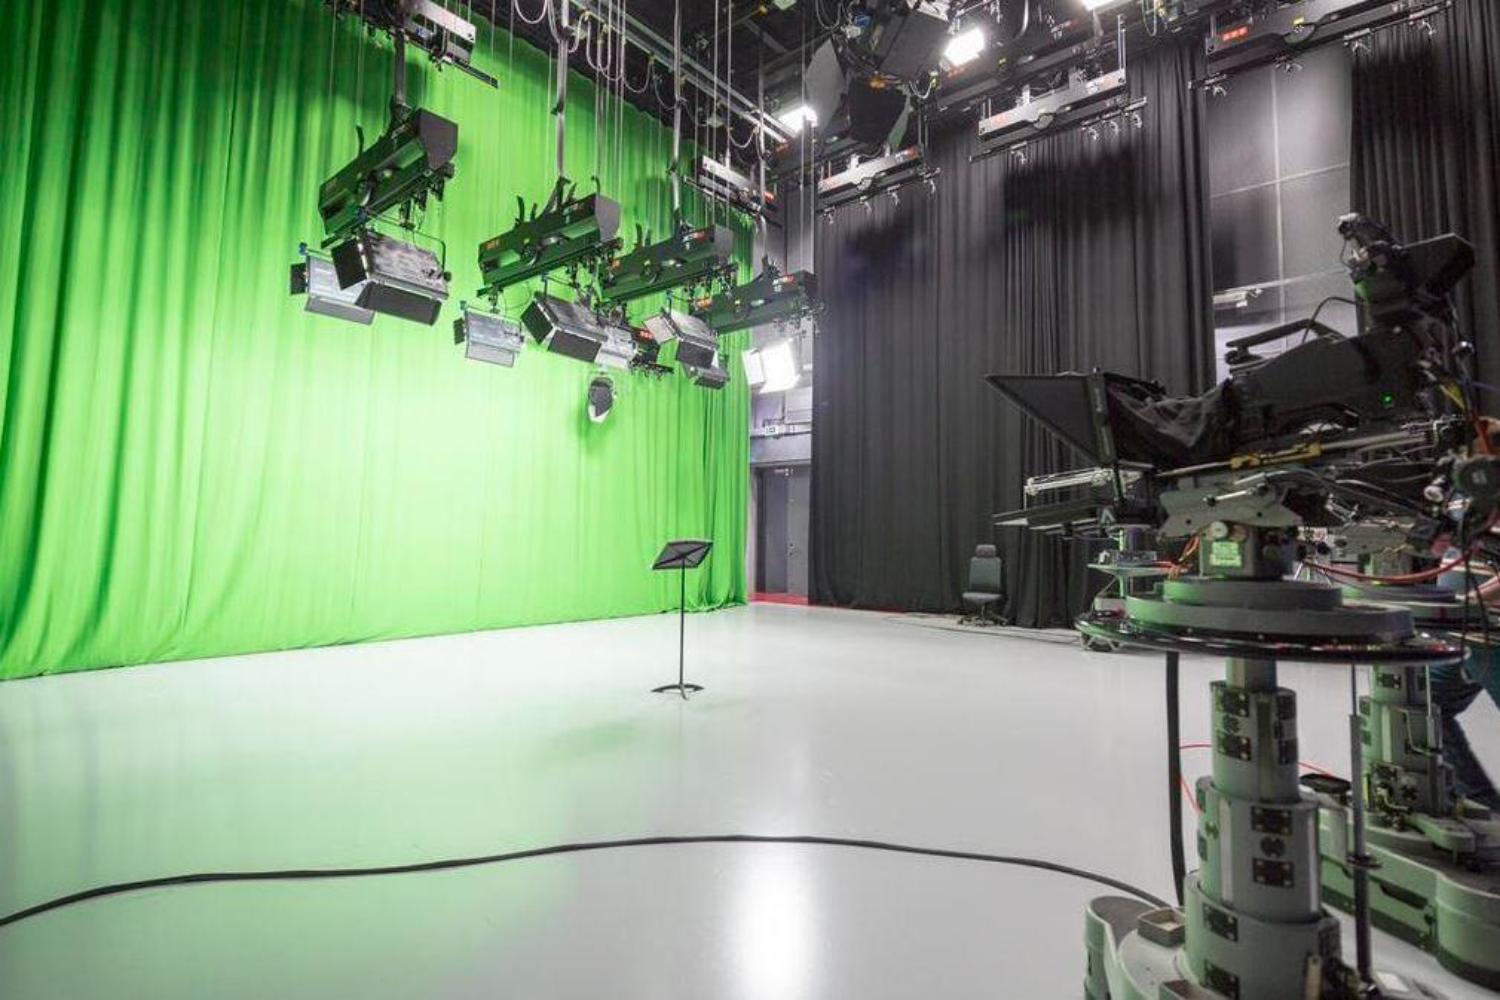 Interior shot of the TV studio with green screen background